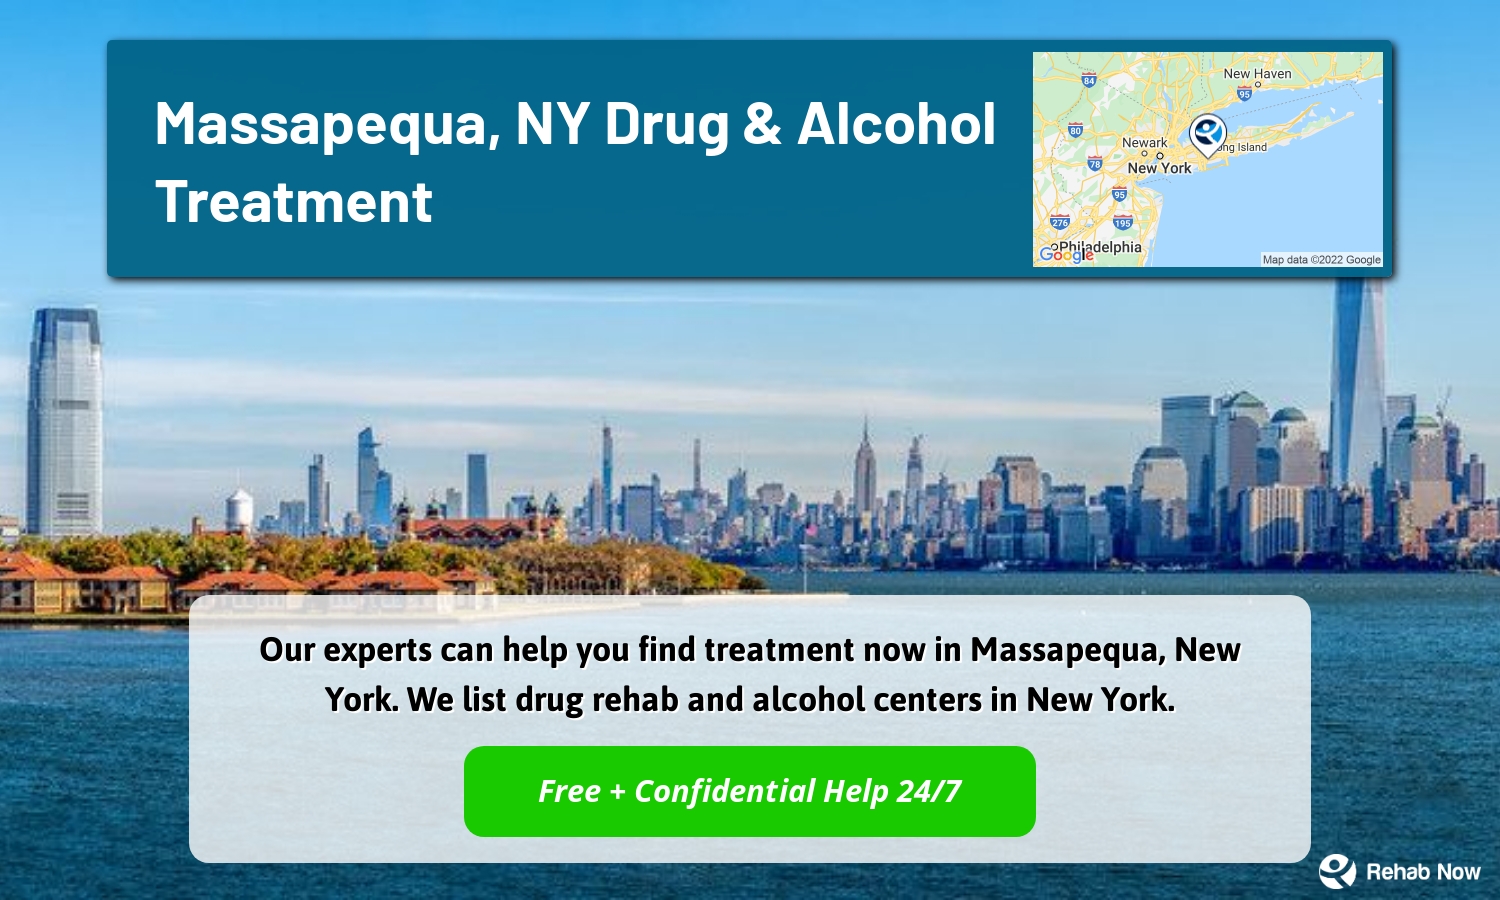 Our experts can help you find treatment now in Massapequa, New York. We list drug rehab and alcohol centers in New York.